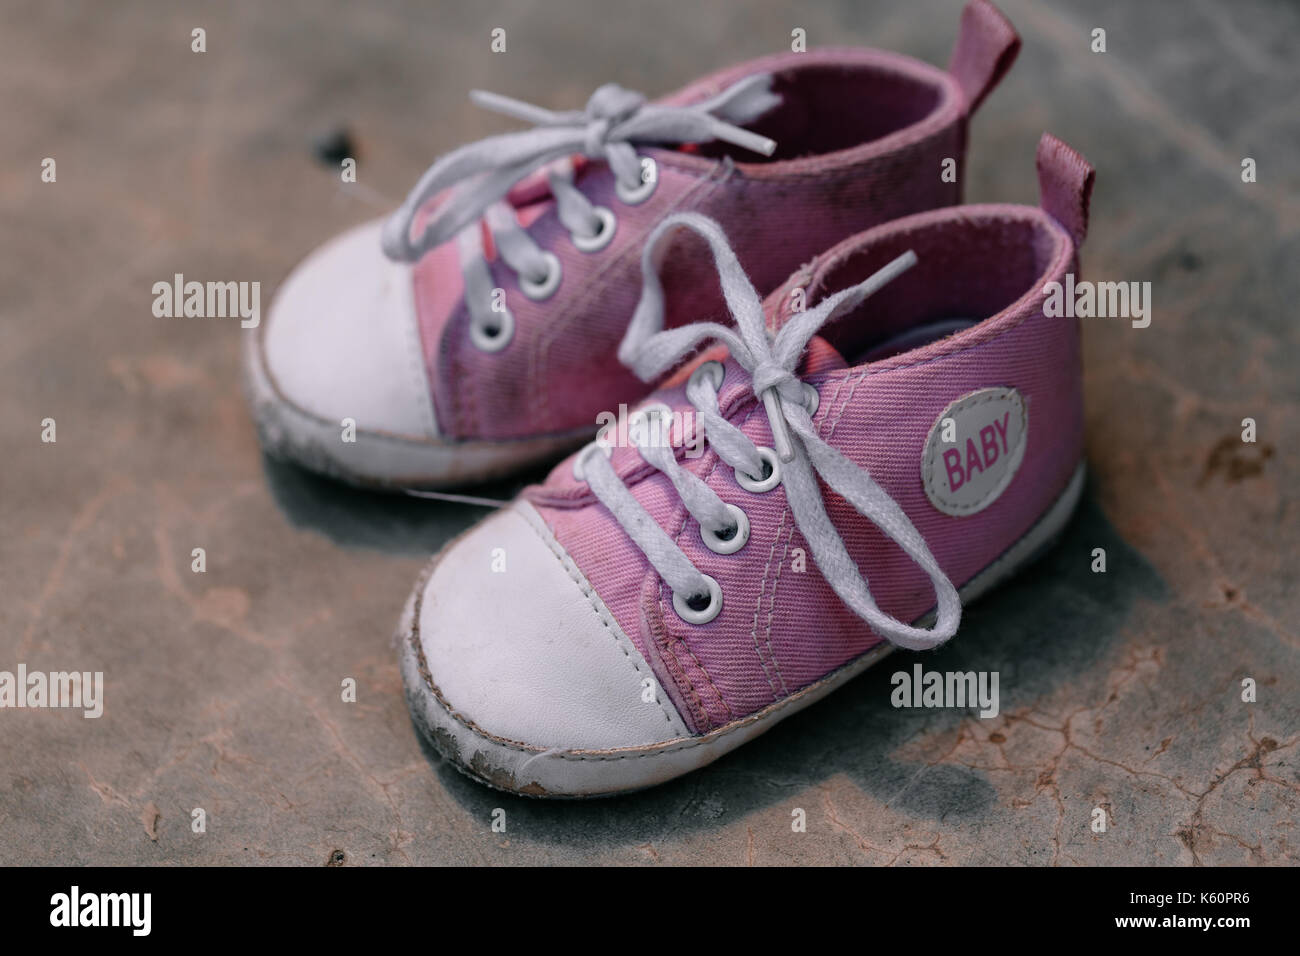 Old baby sneakers closeup photo. Stock Photo